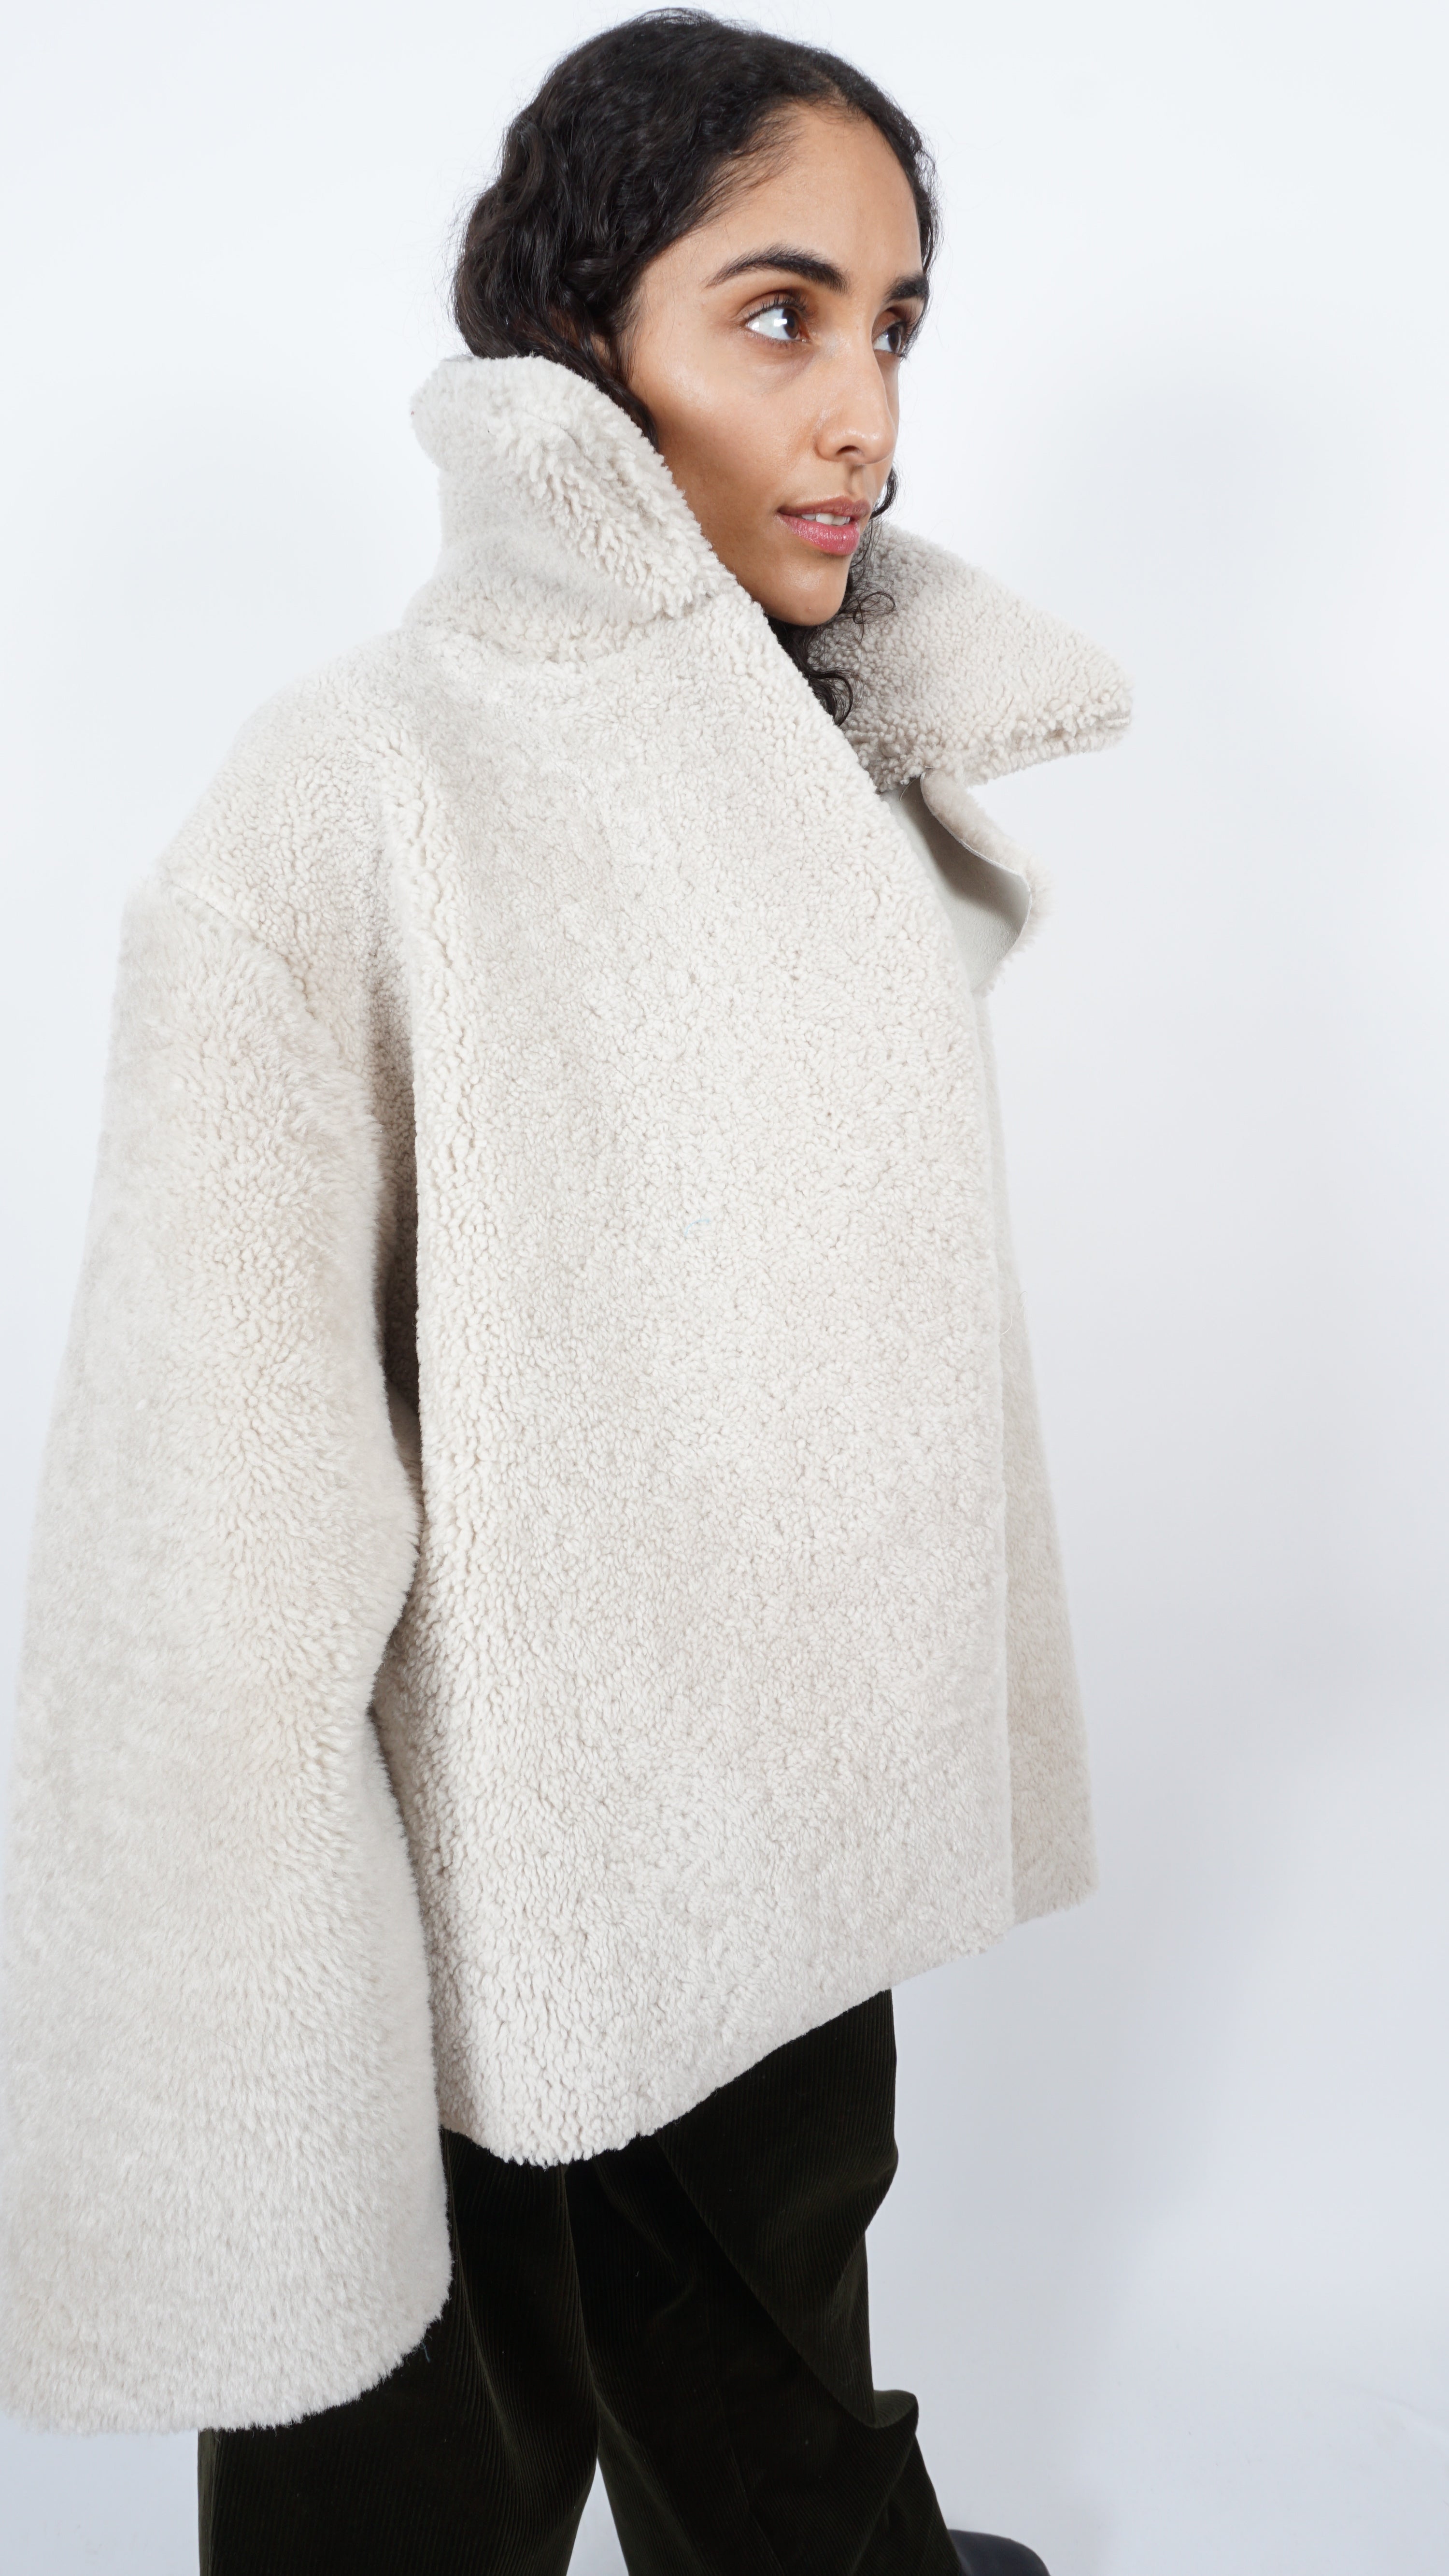 Shearling jacket by Sabine Poupinel